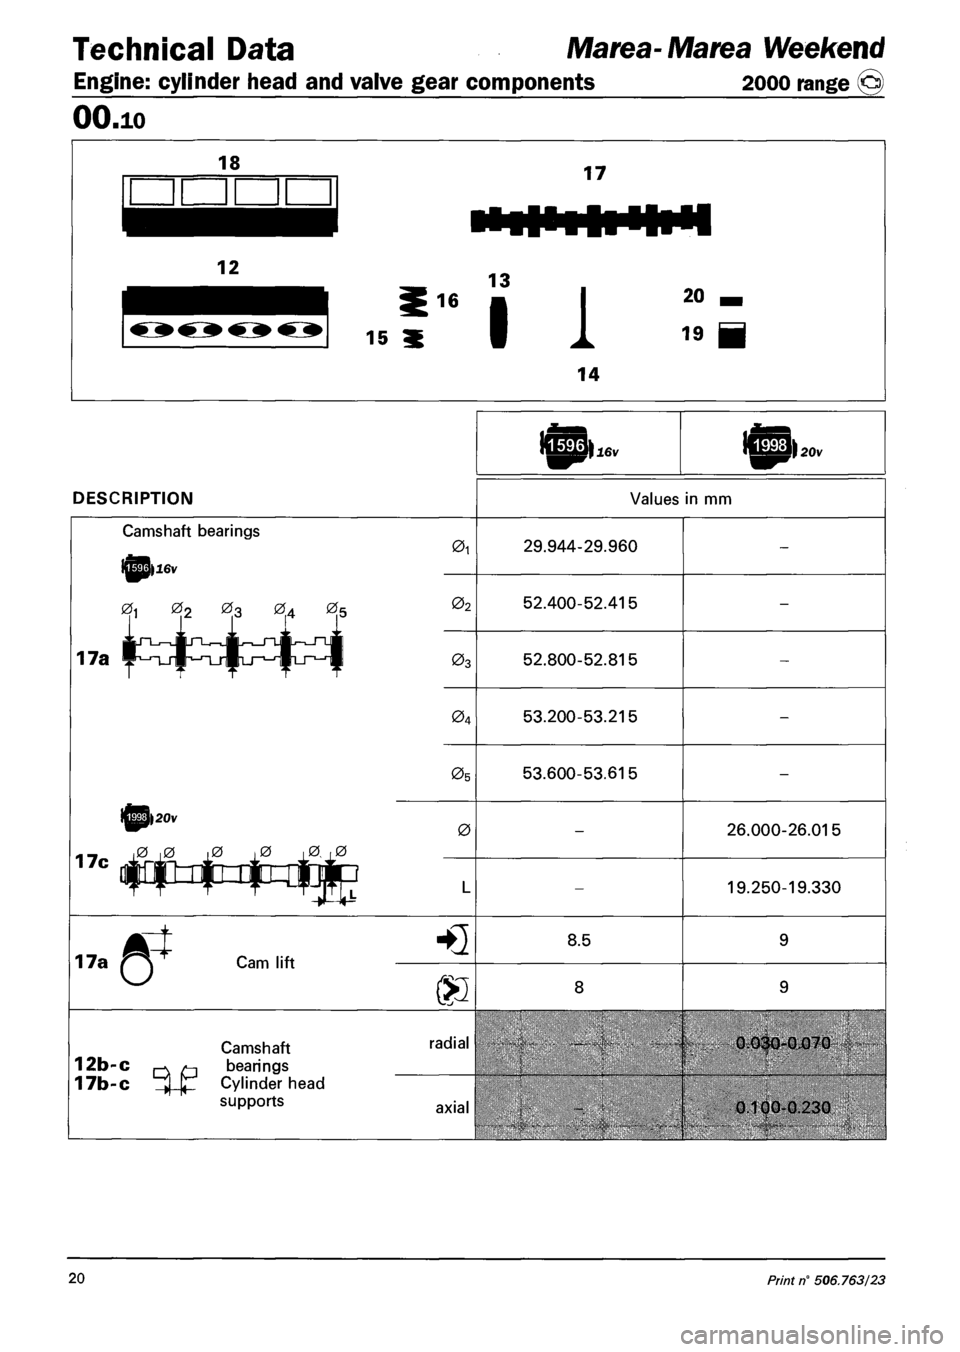 FIAT MAREA 2001 1.G User Guide Technical Data Marea-Marea Weekend 
Engine: cylinder head and valve gear components 2000 range @ 
OO.io 
DESCRIPTION Values in mm 
Camshaft bearings 
»16v 
01 02 03 04 05 
17a ¥i-rT_j-§^T_rtj-^p^ 
